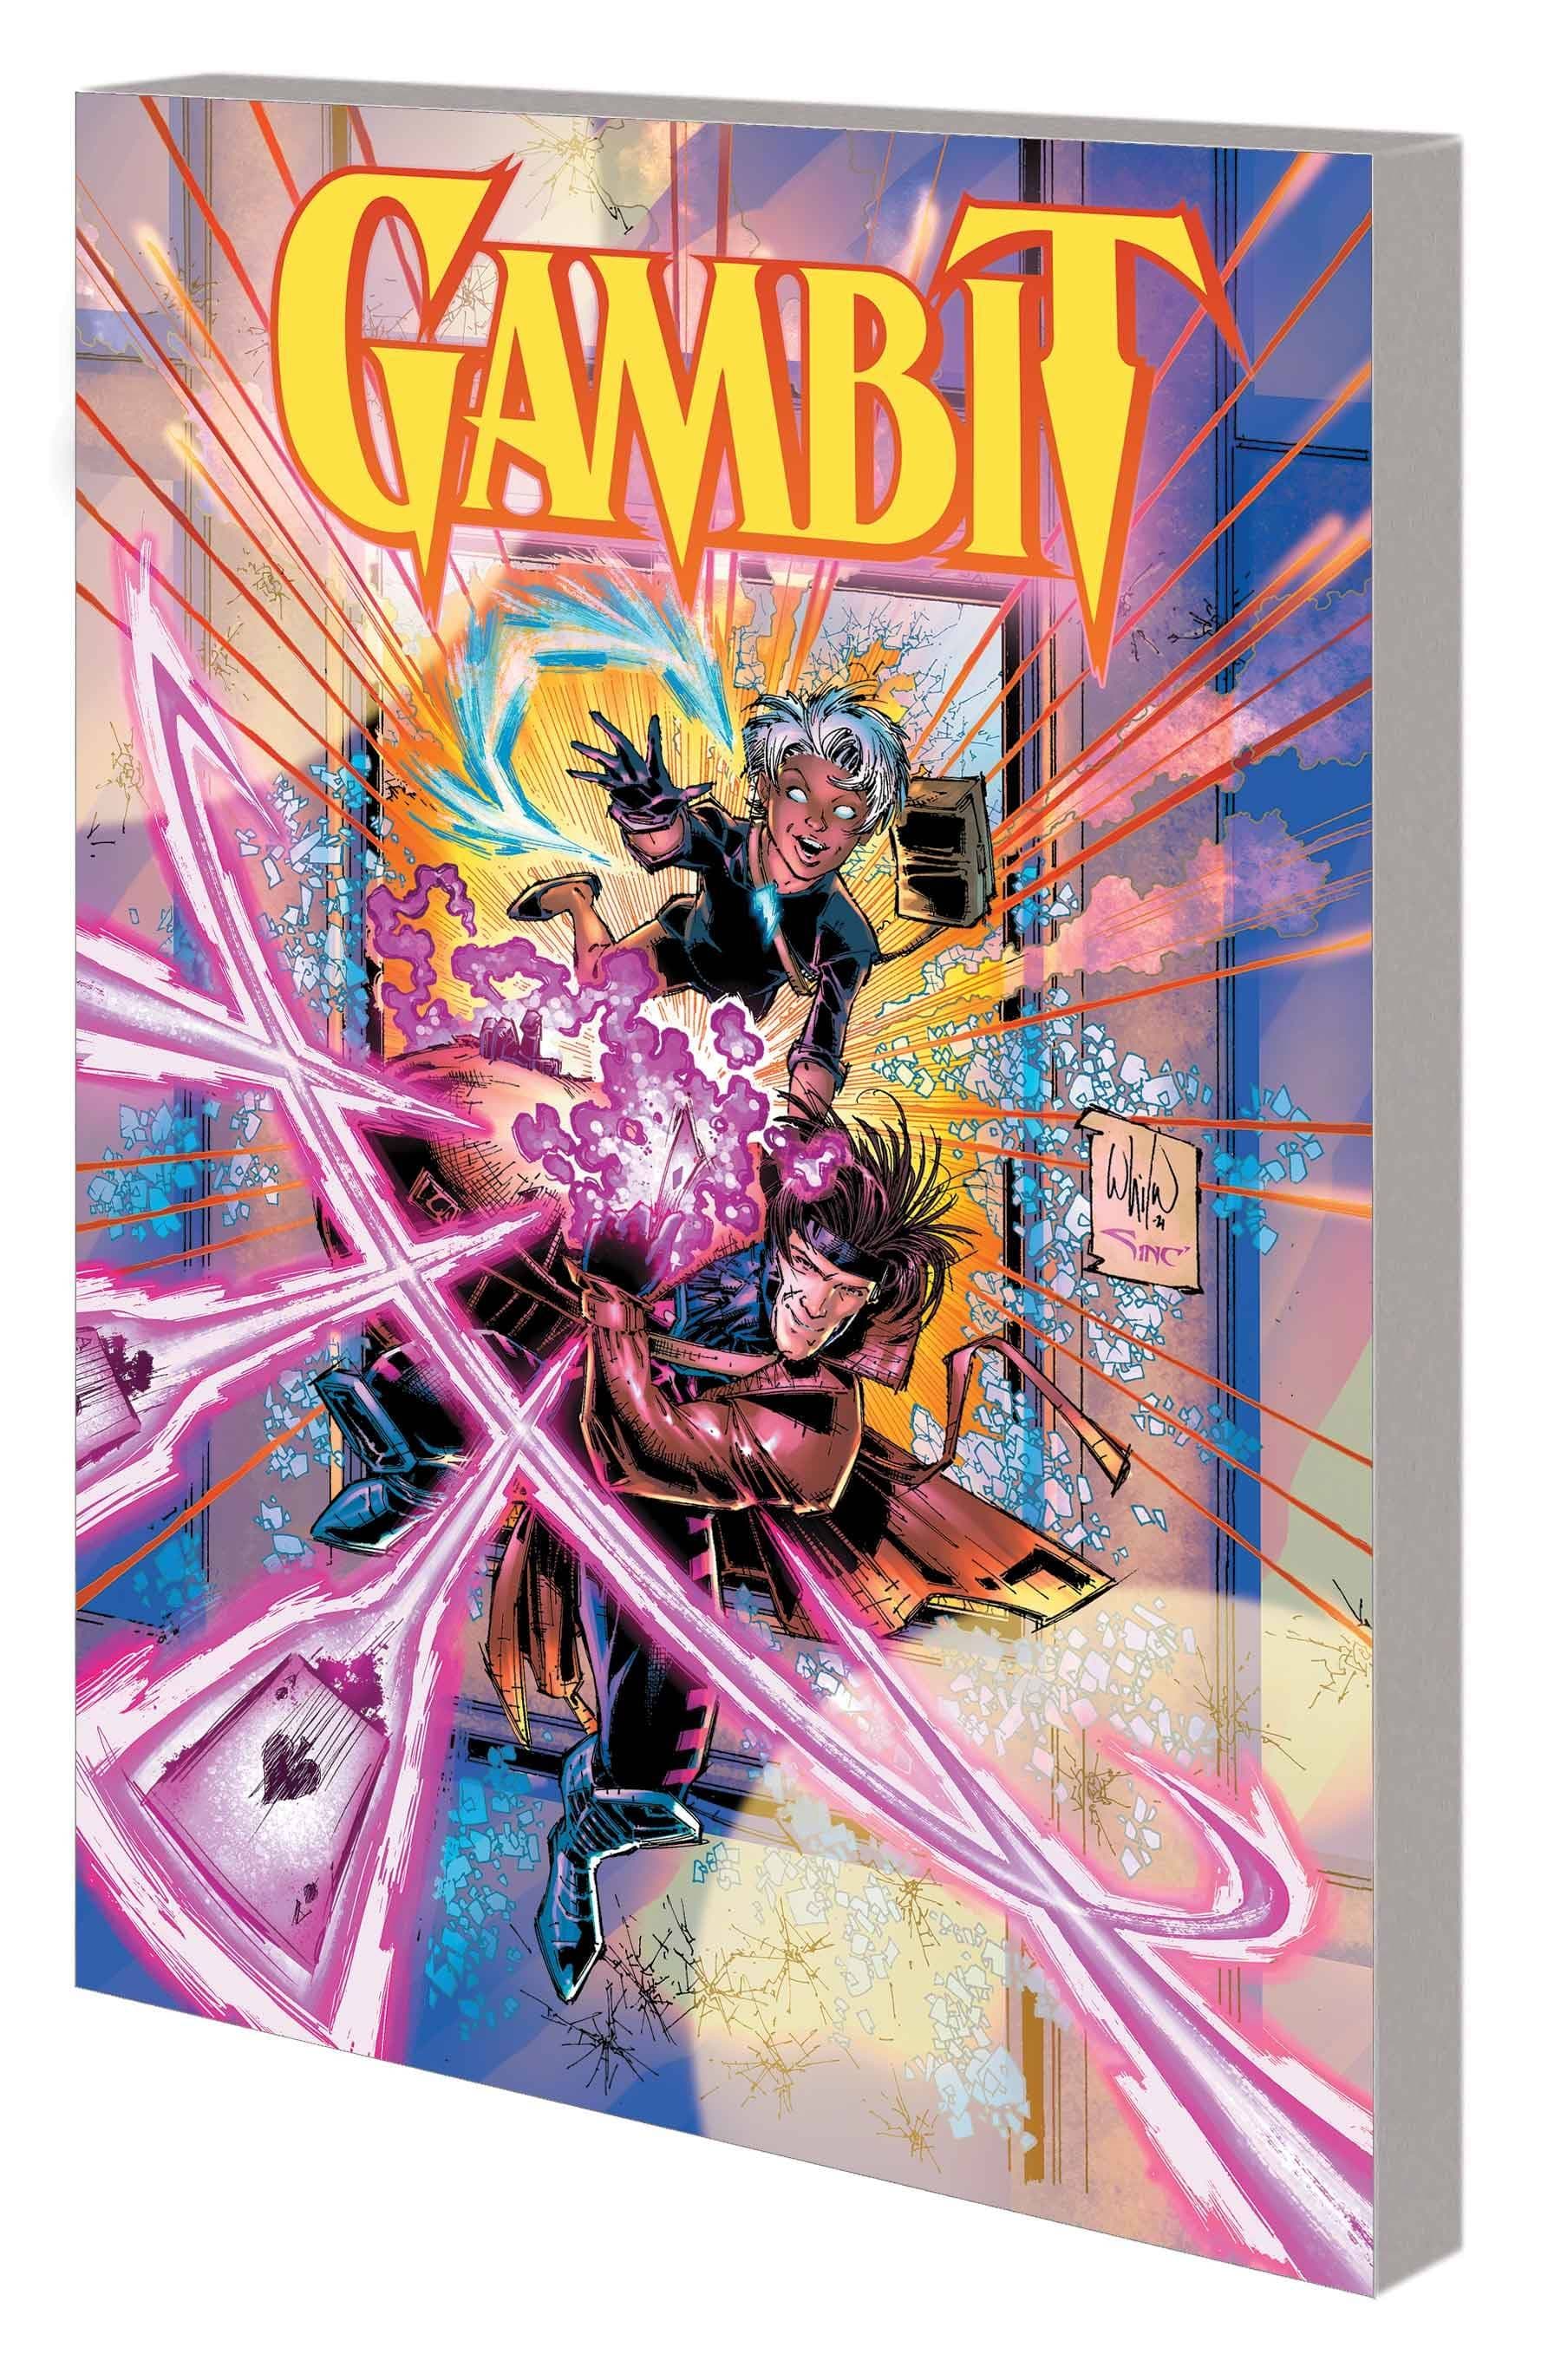 Gambit: October 23, 2012 by Gambit New Orleans - Issuu